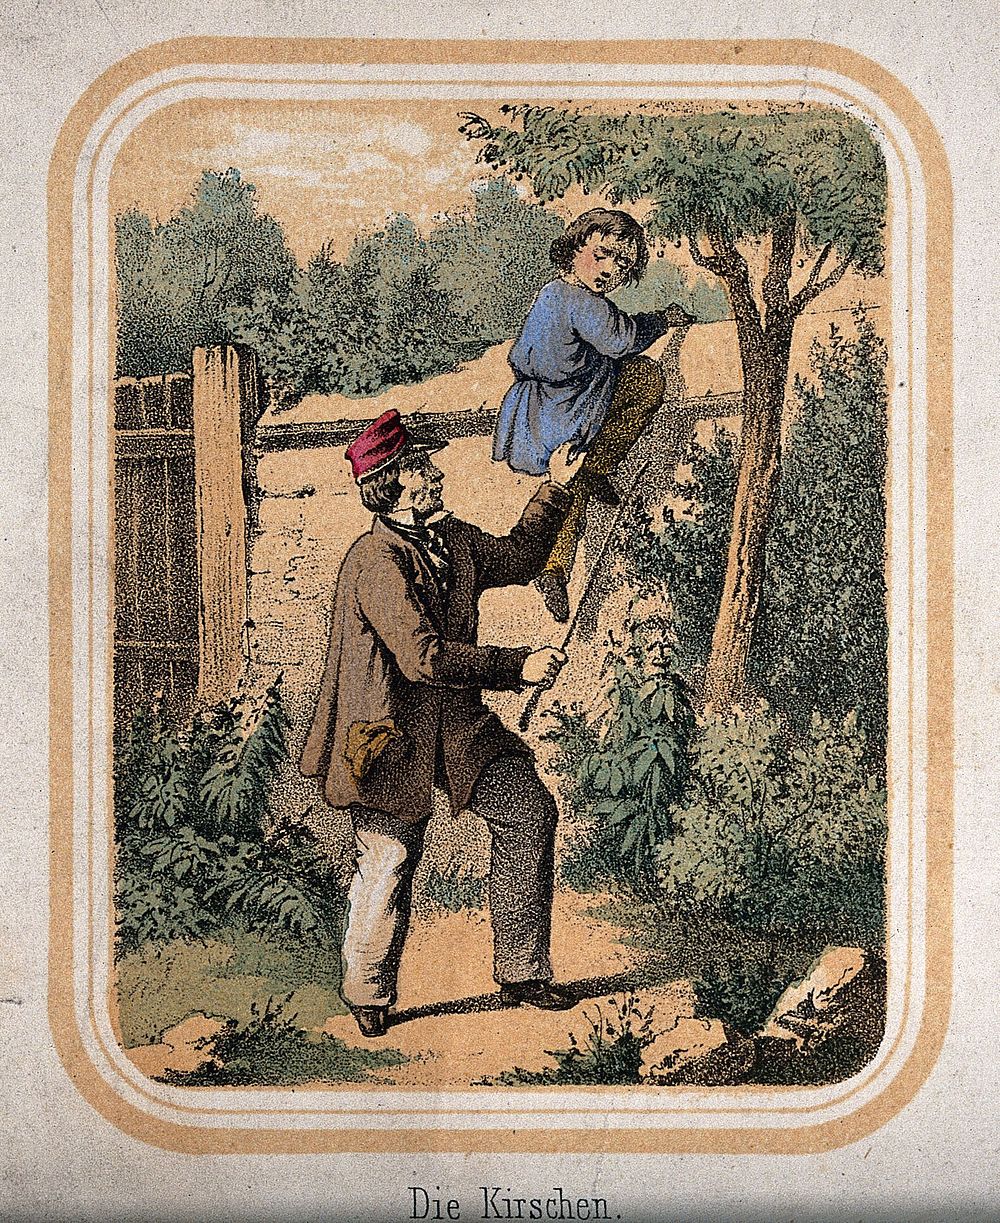 A boy is climbing over the wall to escape from the man with a stick. Coloured lithograph.